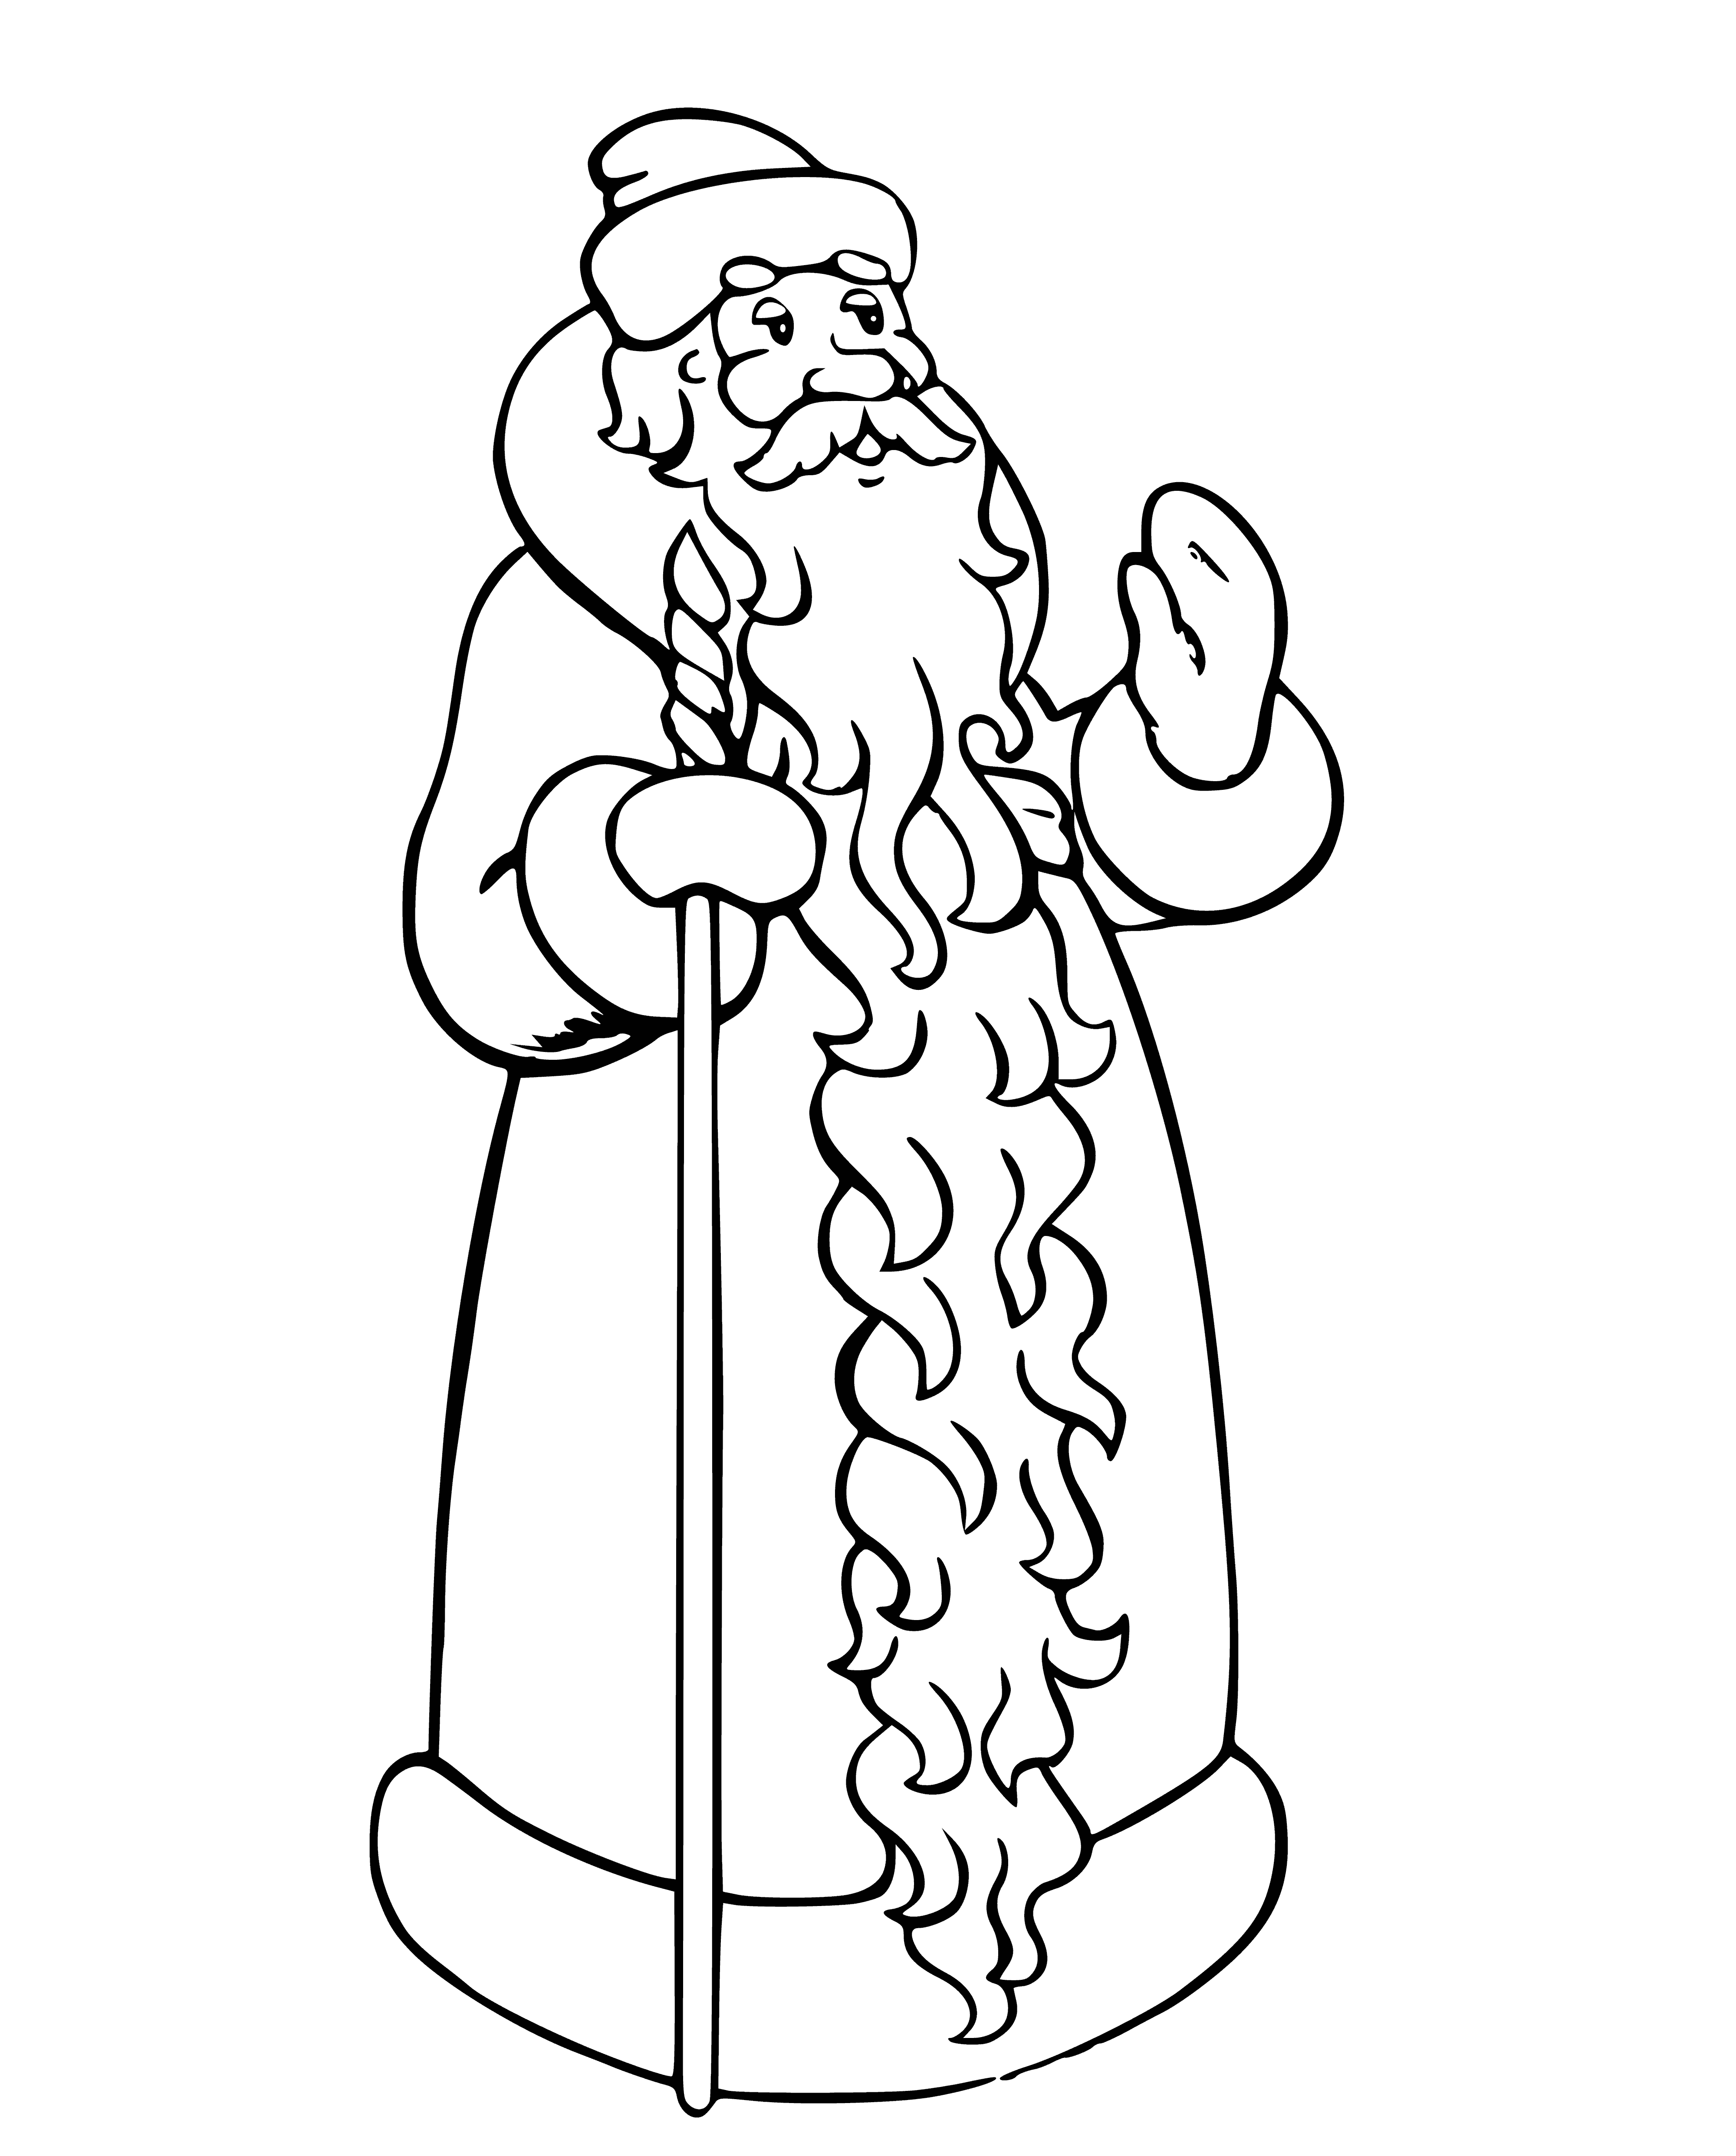 coloring page: Santa Claus is a jolly man with white fur trim & a sack of presents, enchanting children with his red hat & black book. #ChristmasEve